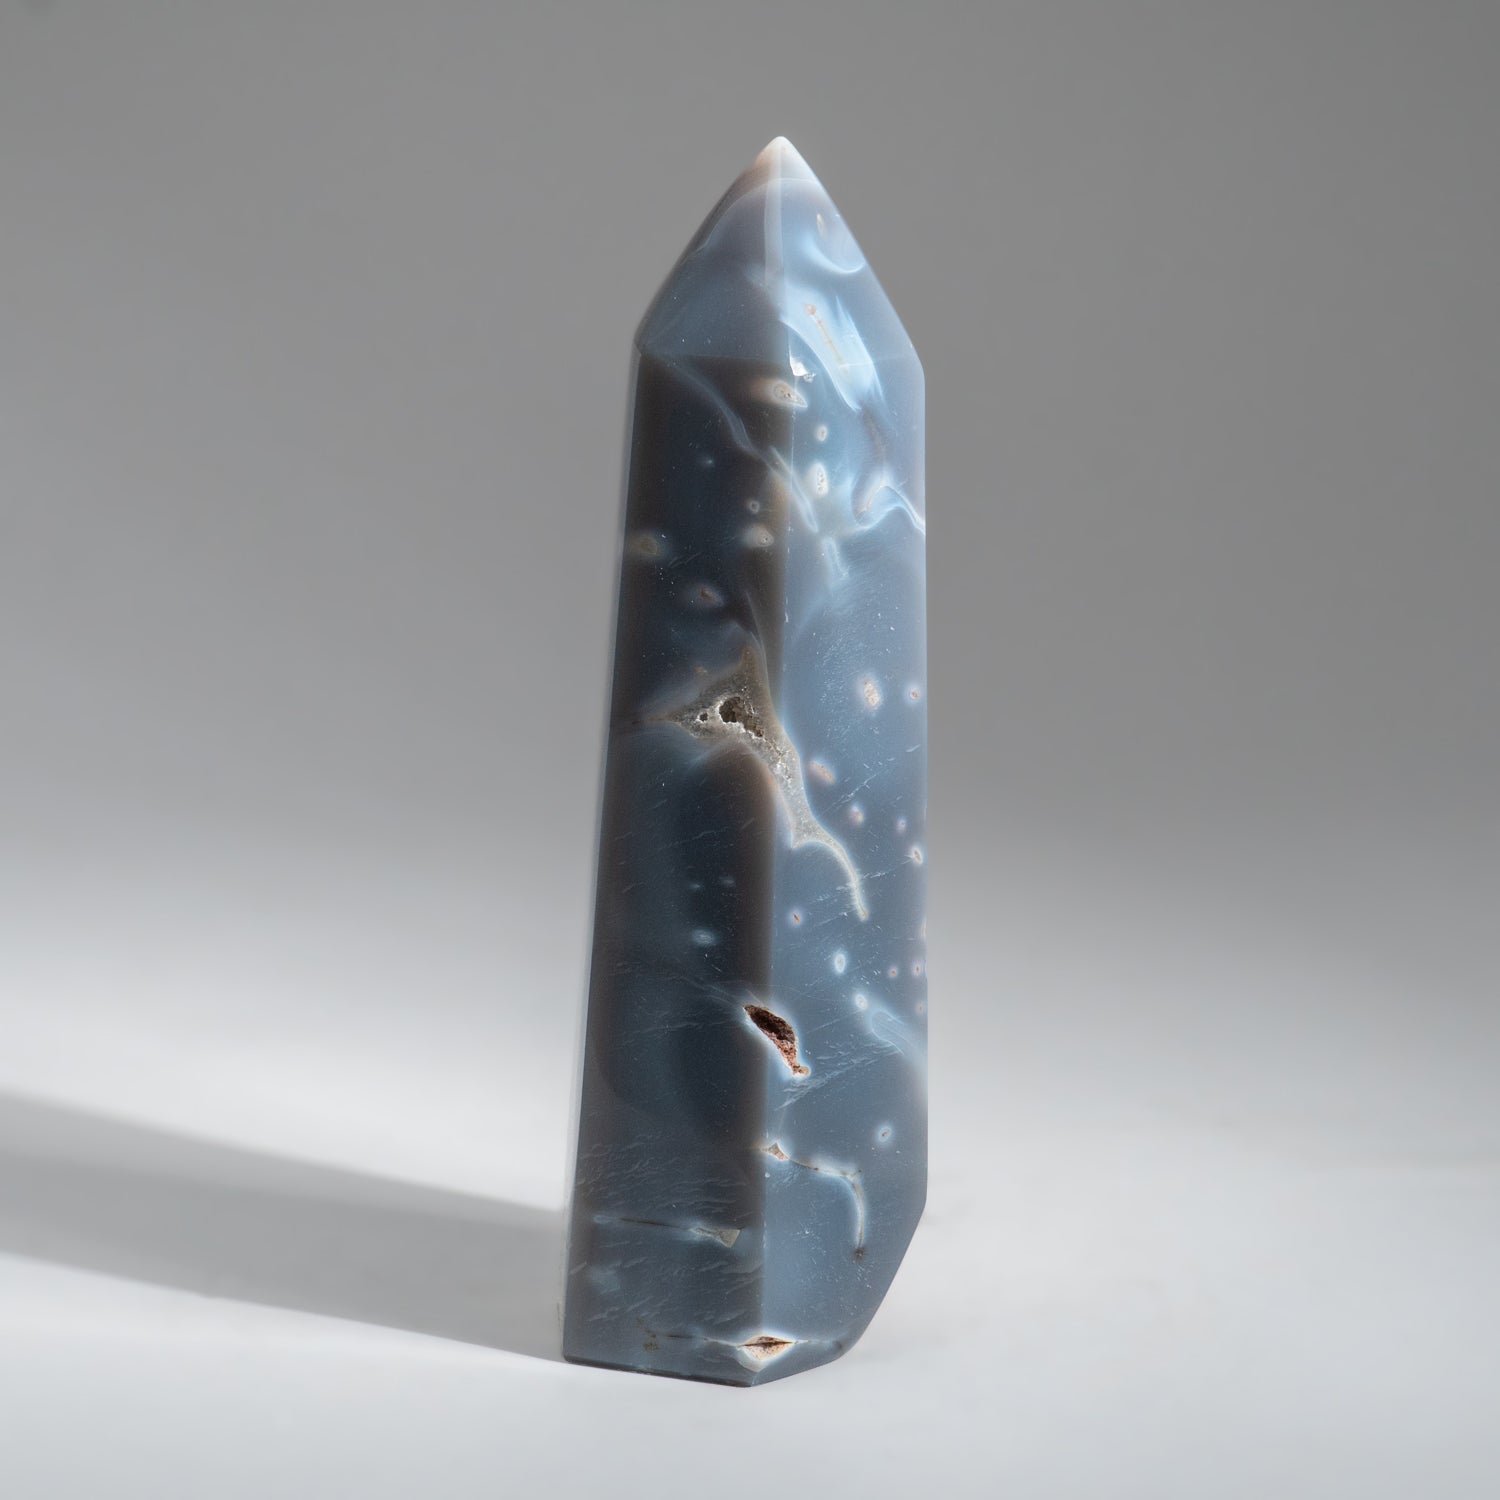 Genuine Polished Blue Agate Point from Madagascar (2.1 lbs)